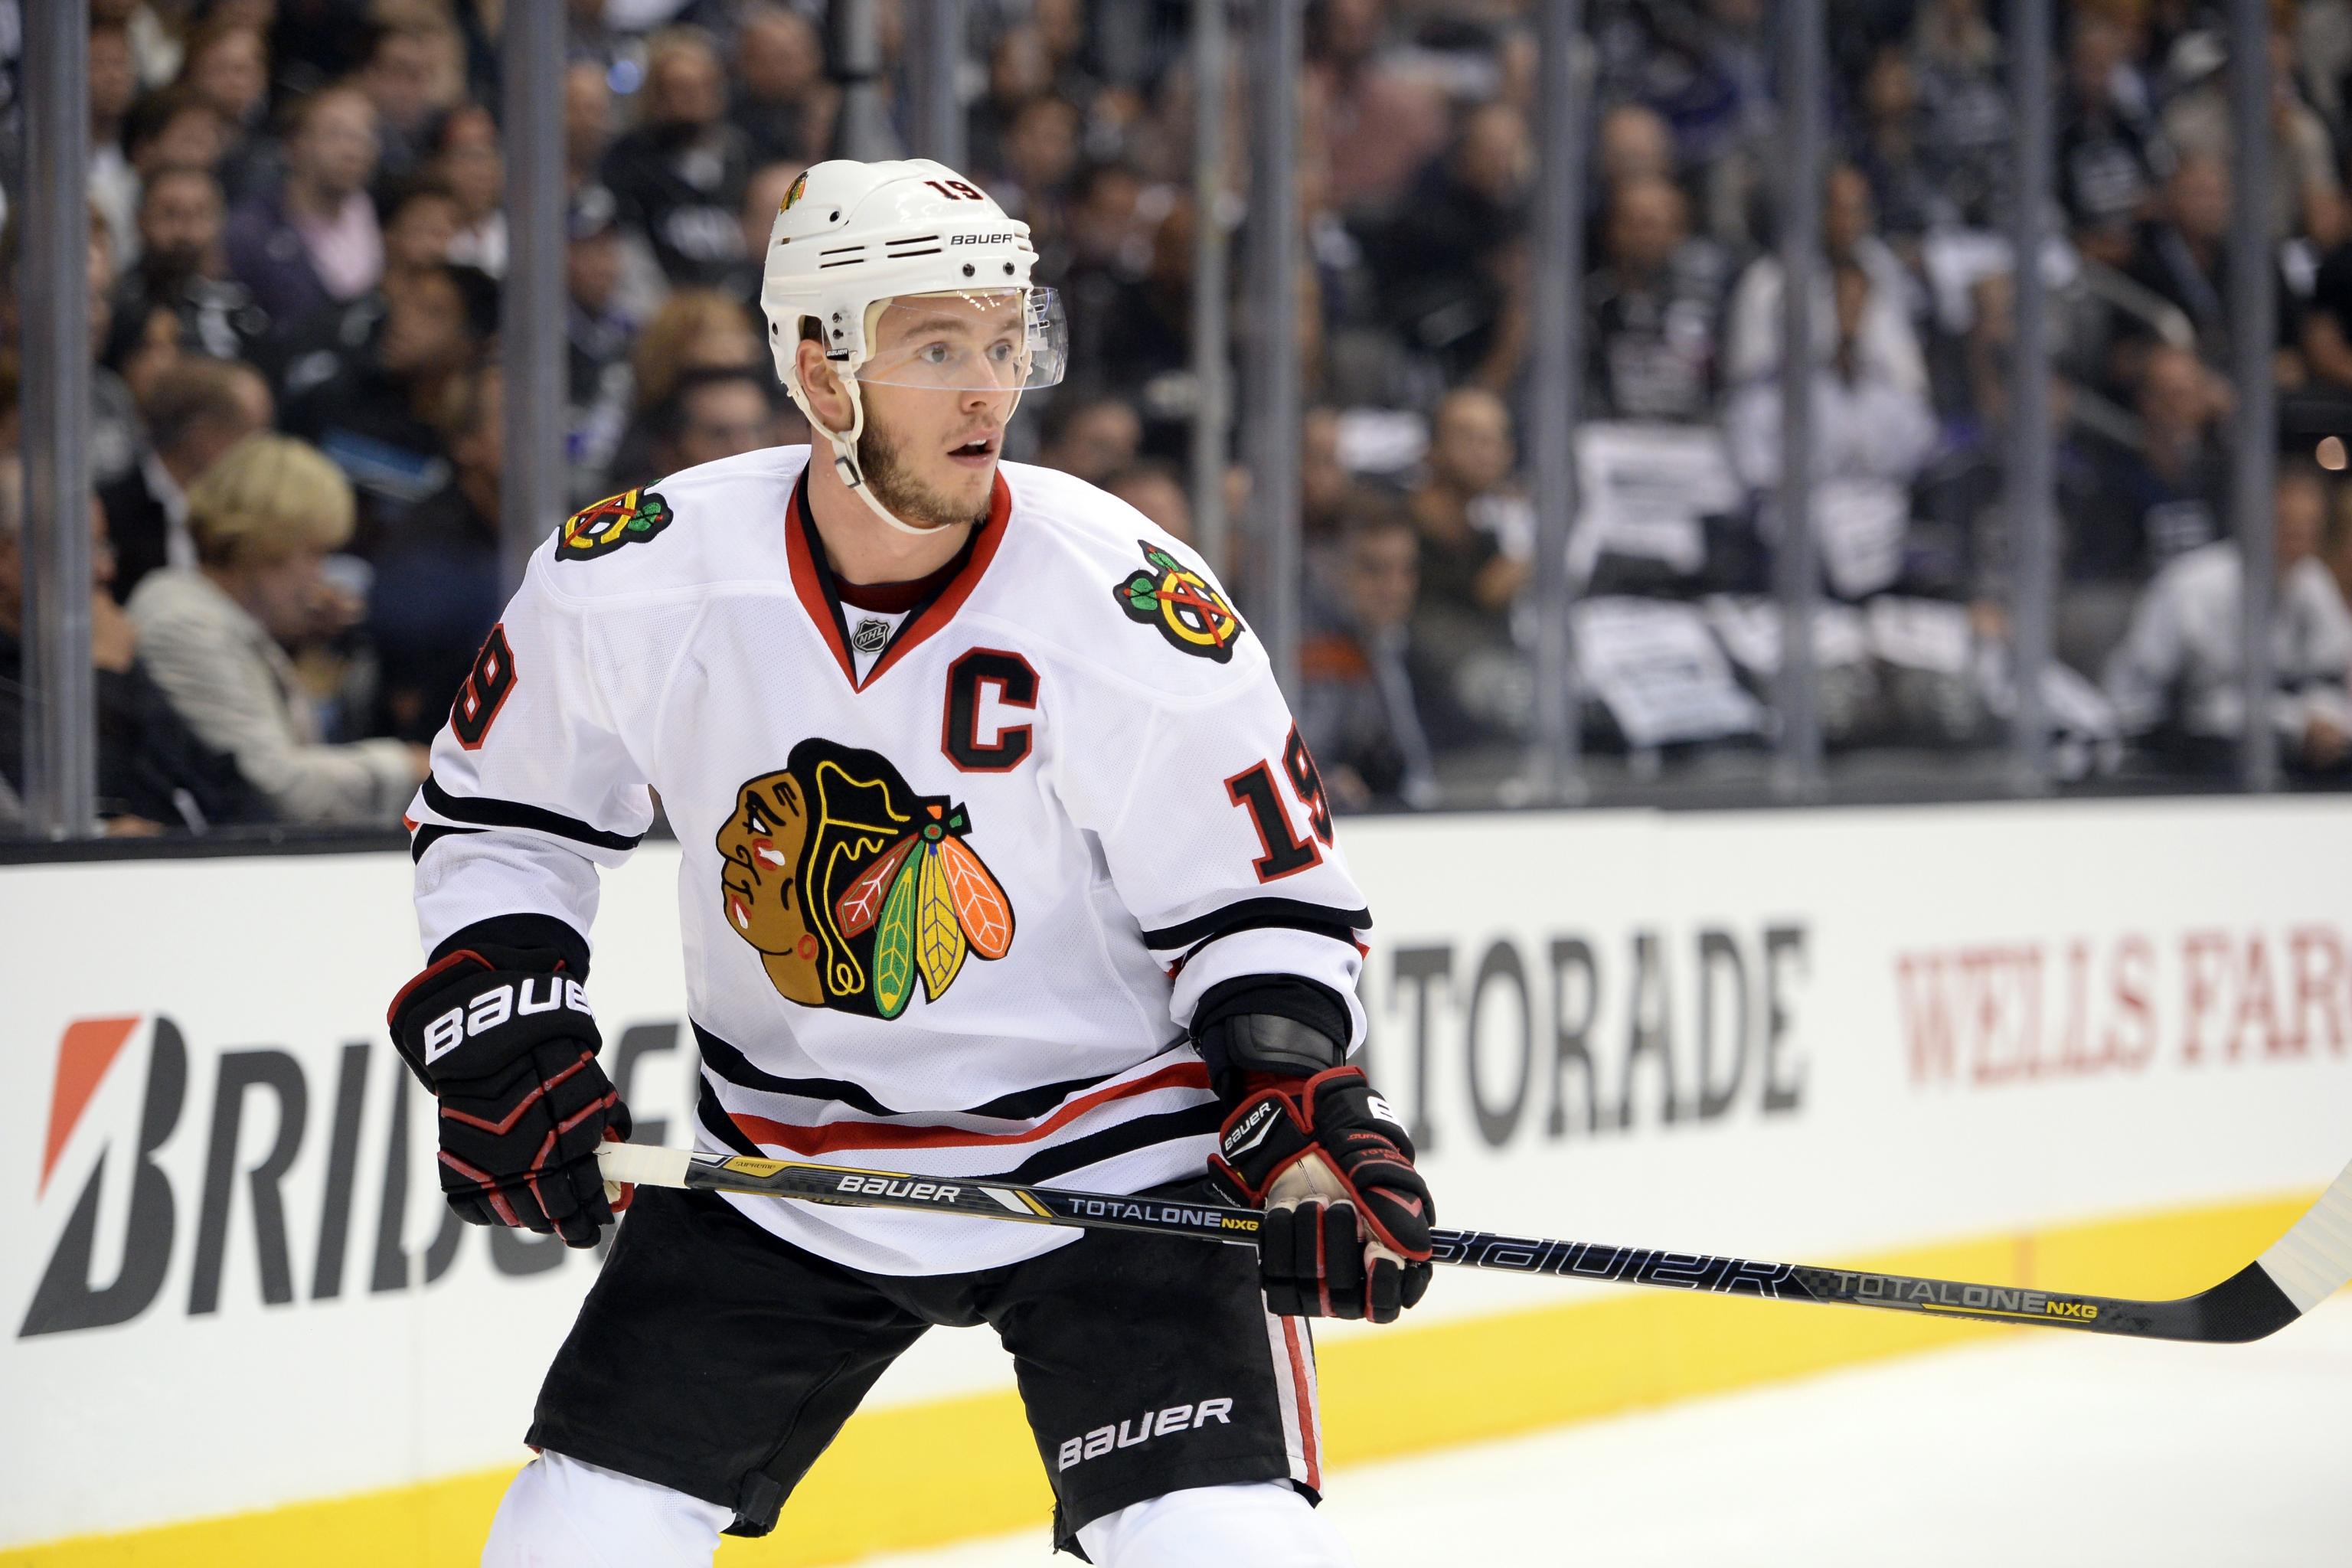 Hossa teams up with Crosby after Pens swing big deal